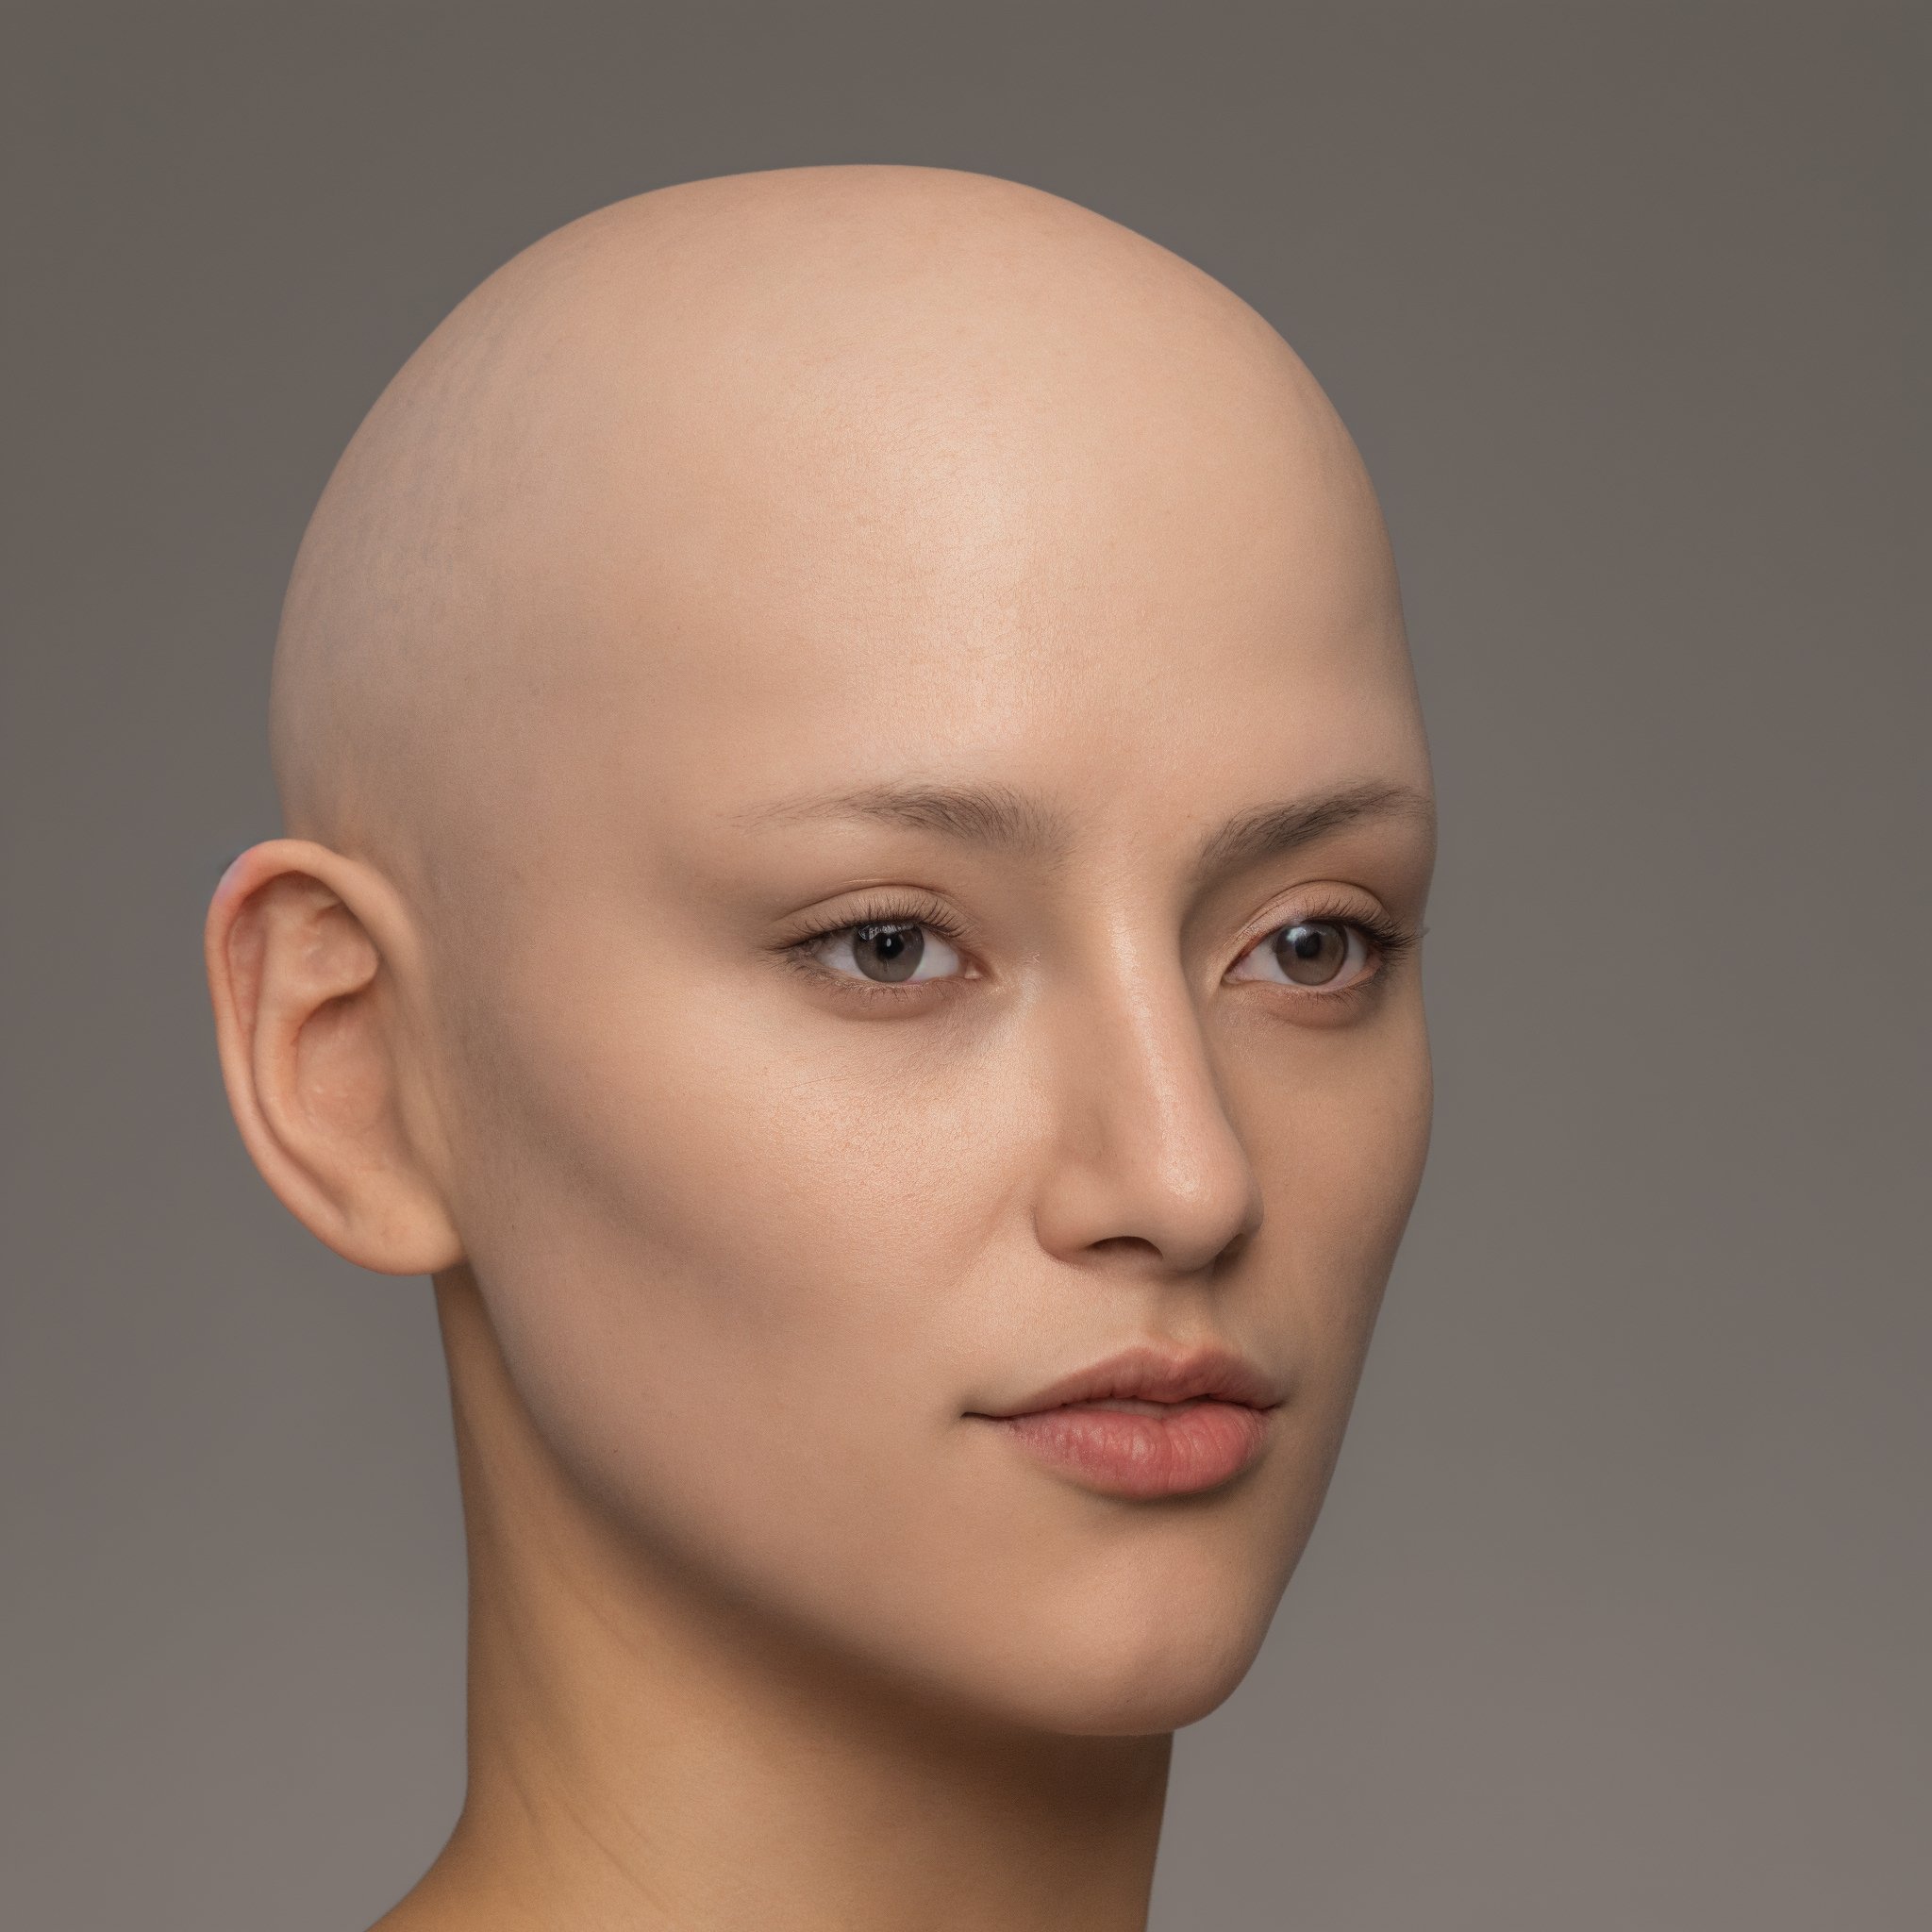 , symmetrical studio portrait of (hairless) Female, overcast lighting, symmetrical diffused lighting, nice skin, natural skin texture, dry skin, ((head facing forward symmetrically)), head and neck fully framed, highly detailed 8k skin texture, plane grey background, in the style of Daniel Boschung's FACE CARTOGRAPHY, 

detailed face, detailed nose, realism, realistic, raw, photorealistic, stunning realistic photograph, smooth,